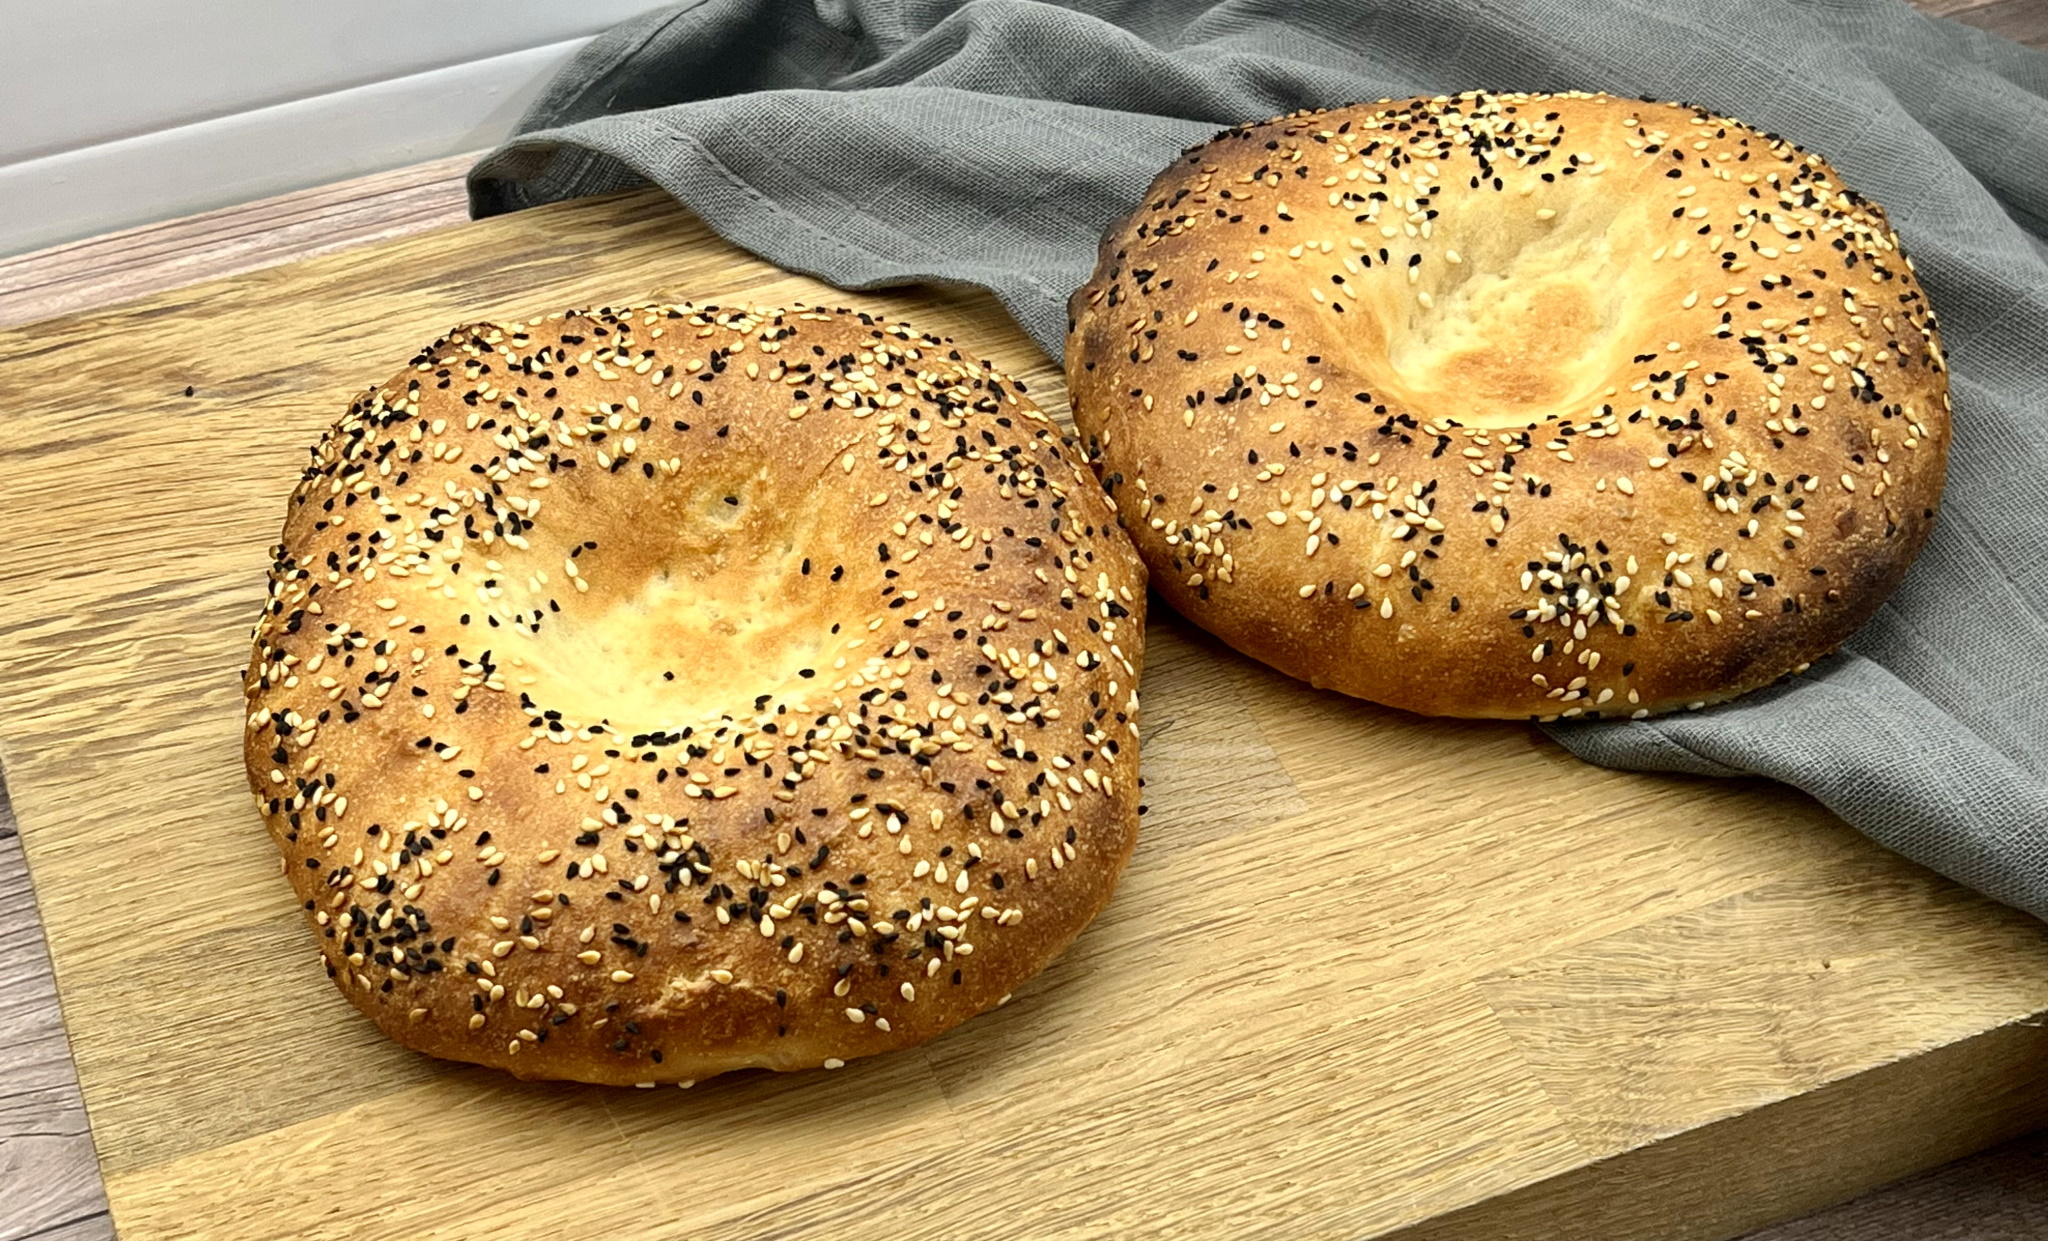 You are currently viewing Uzbek Bread (Obi Non)